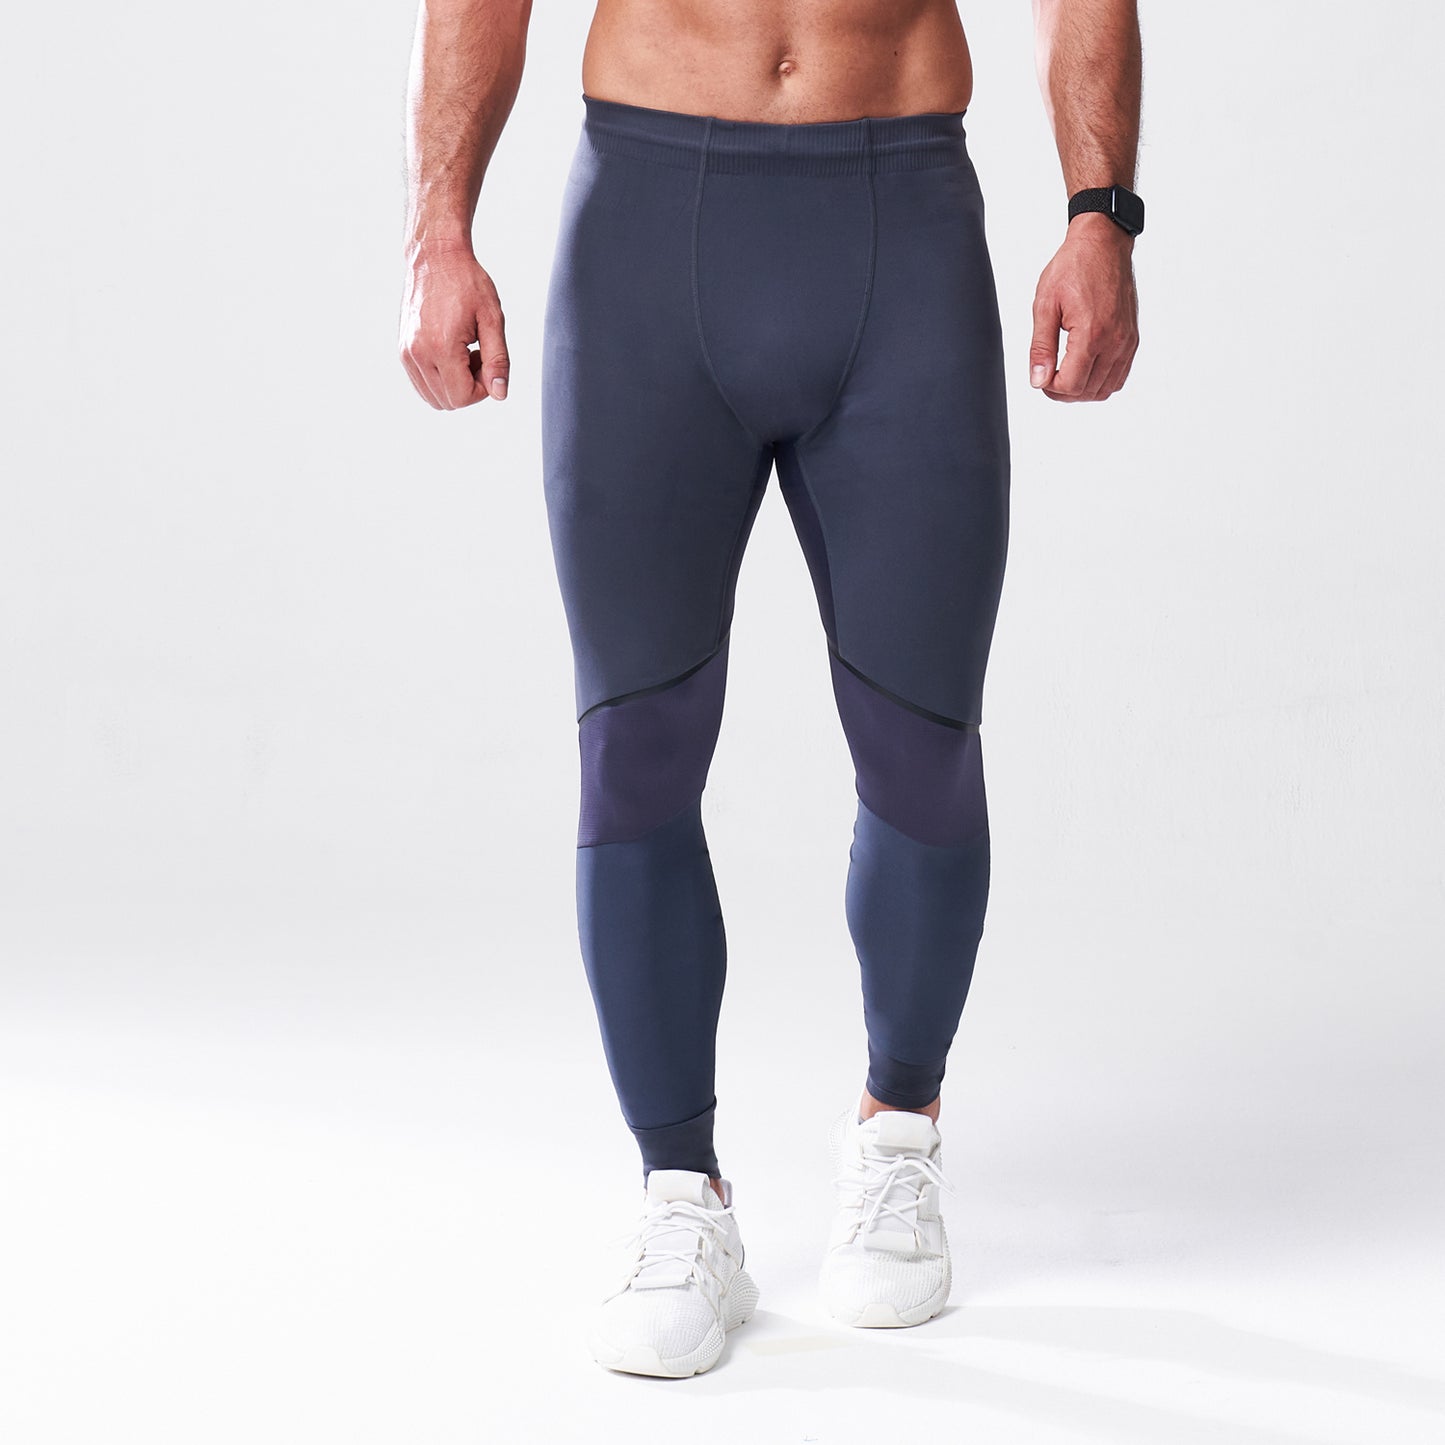 squatwolf-gym-wear-lab360-impact-tight-india-ink-workout-tights-for-men